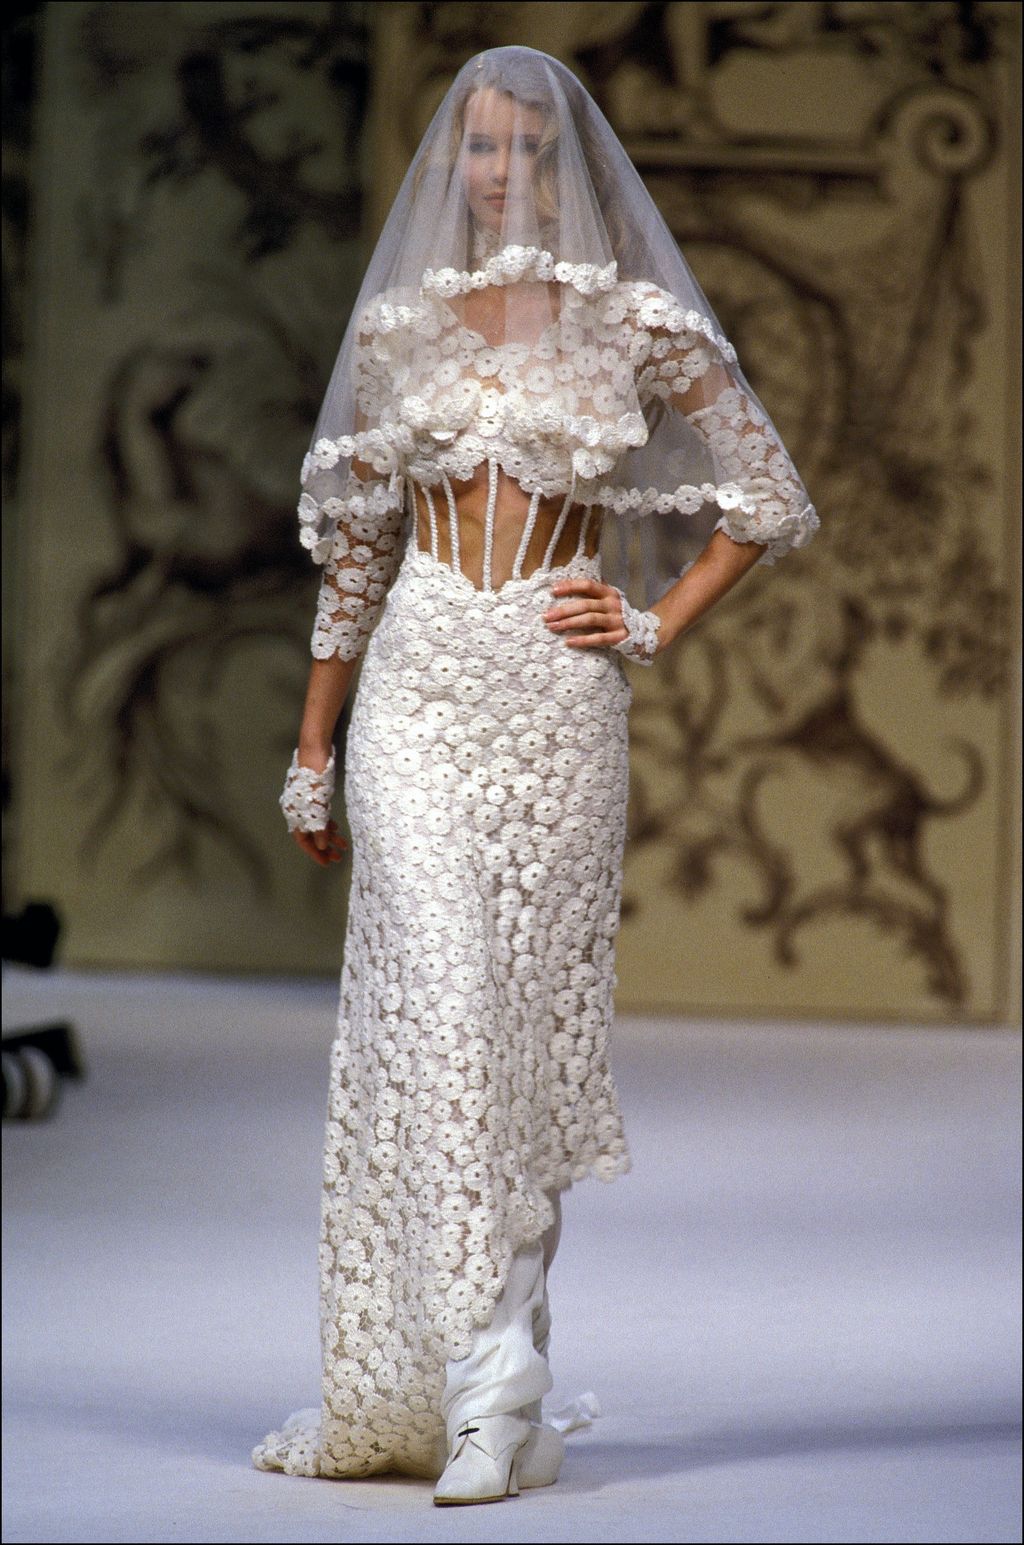 FRANCE - JANUARY 01:  Fashion: haute couture spring summer 1993 in Paris, France in January, 1993 - Chanel (Claudia Schiffer).  (Photo by Daniel SIMON/Gamma-Rapho via Getty Images)